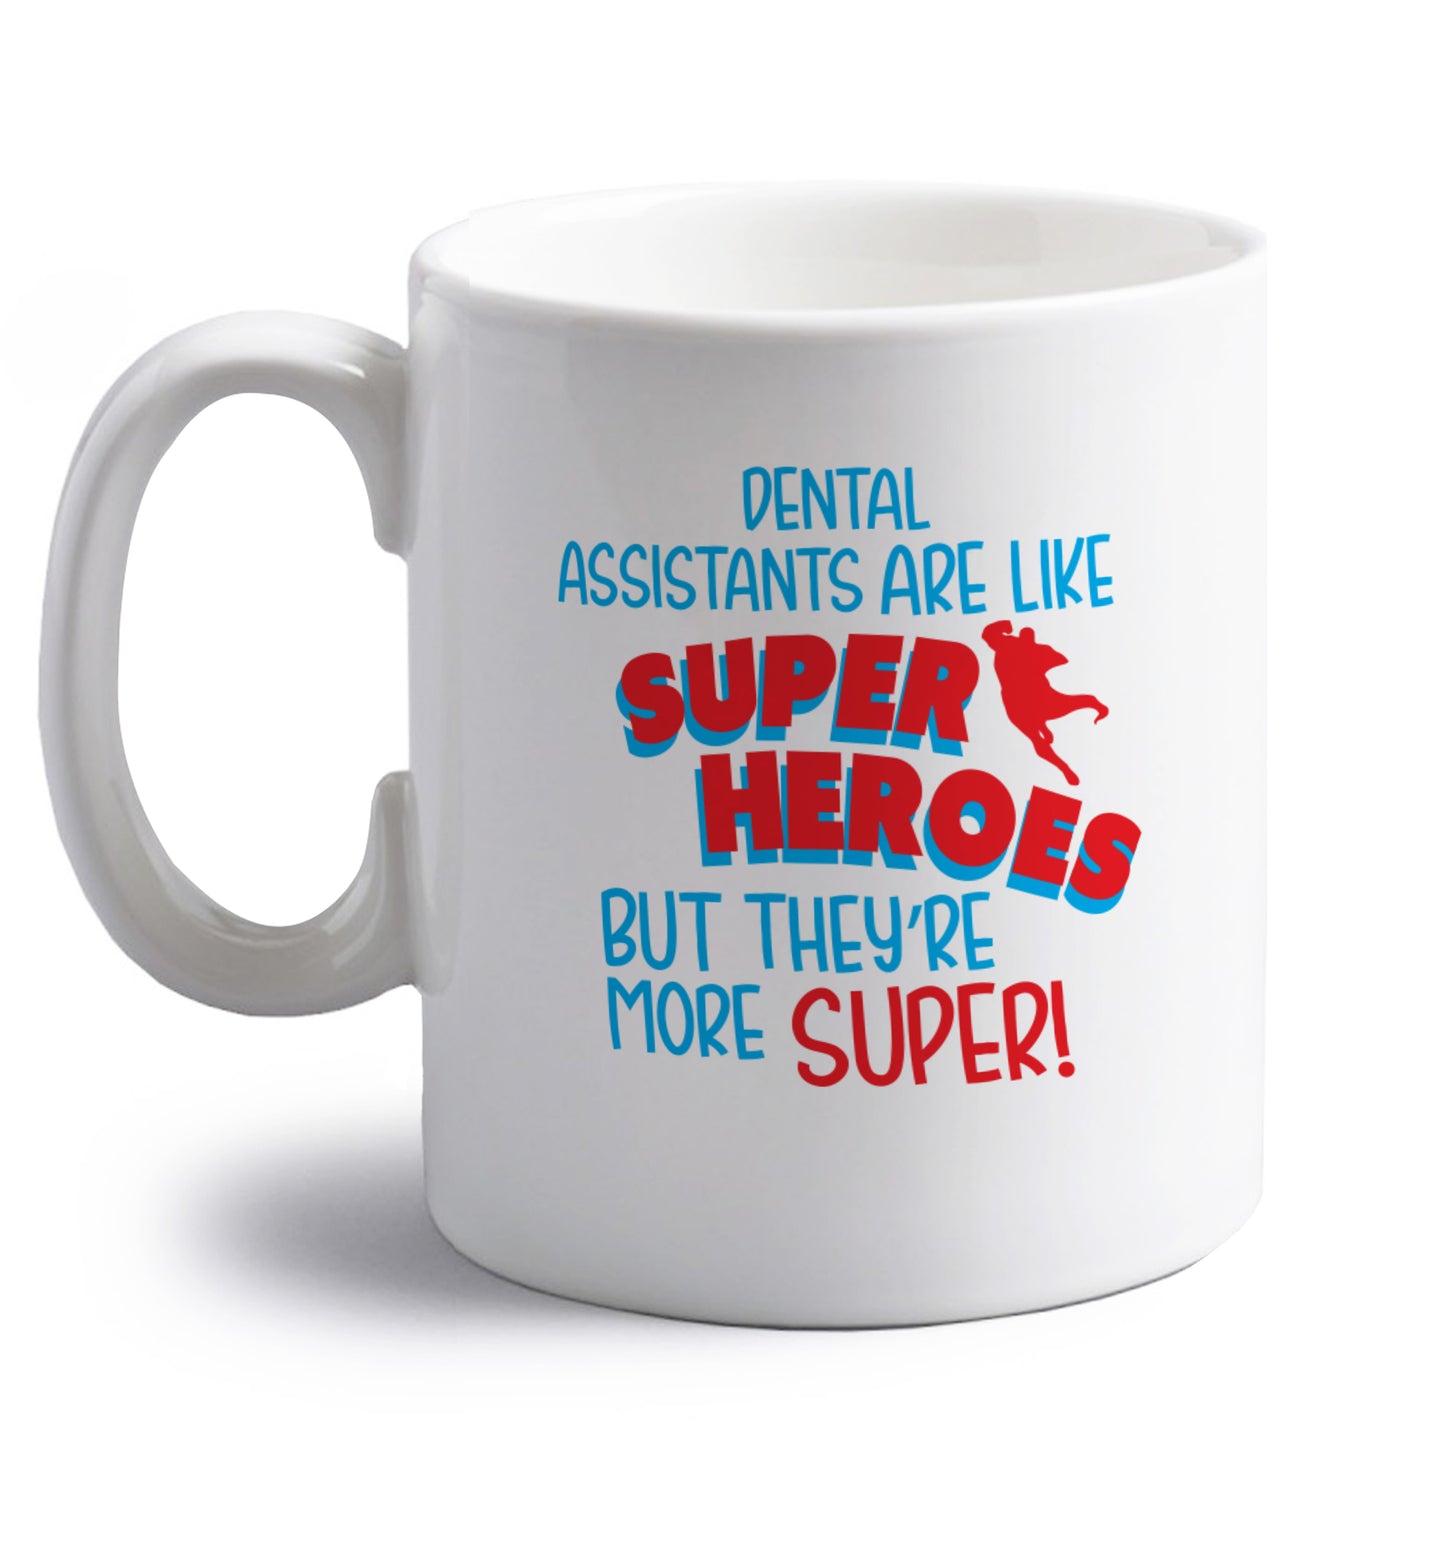 Dental Assistants are like superheros but they're more super right handed white ceramic mug 